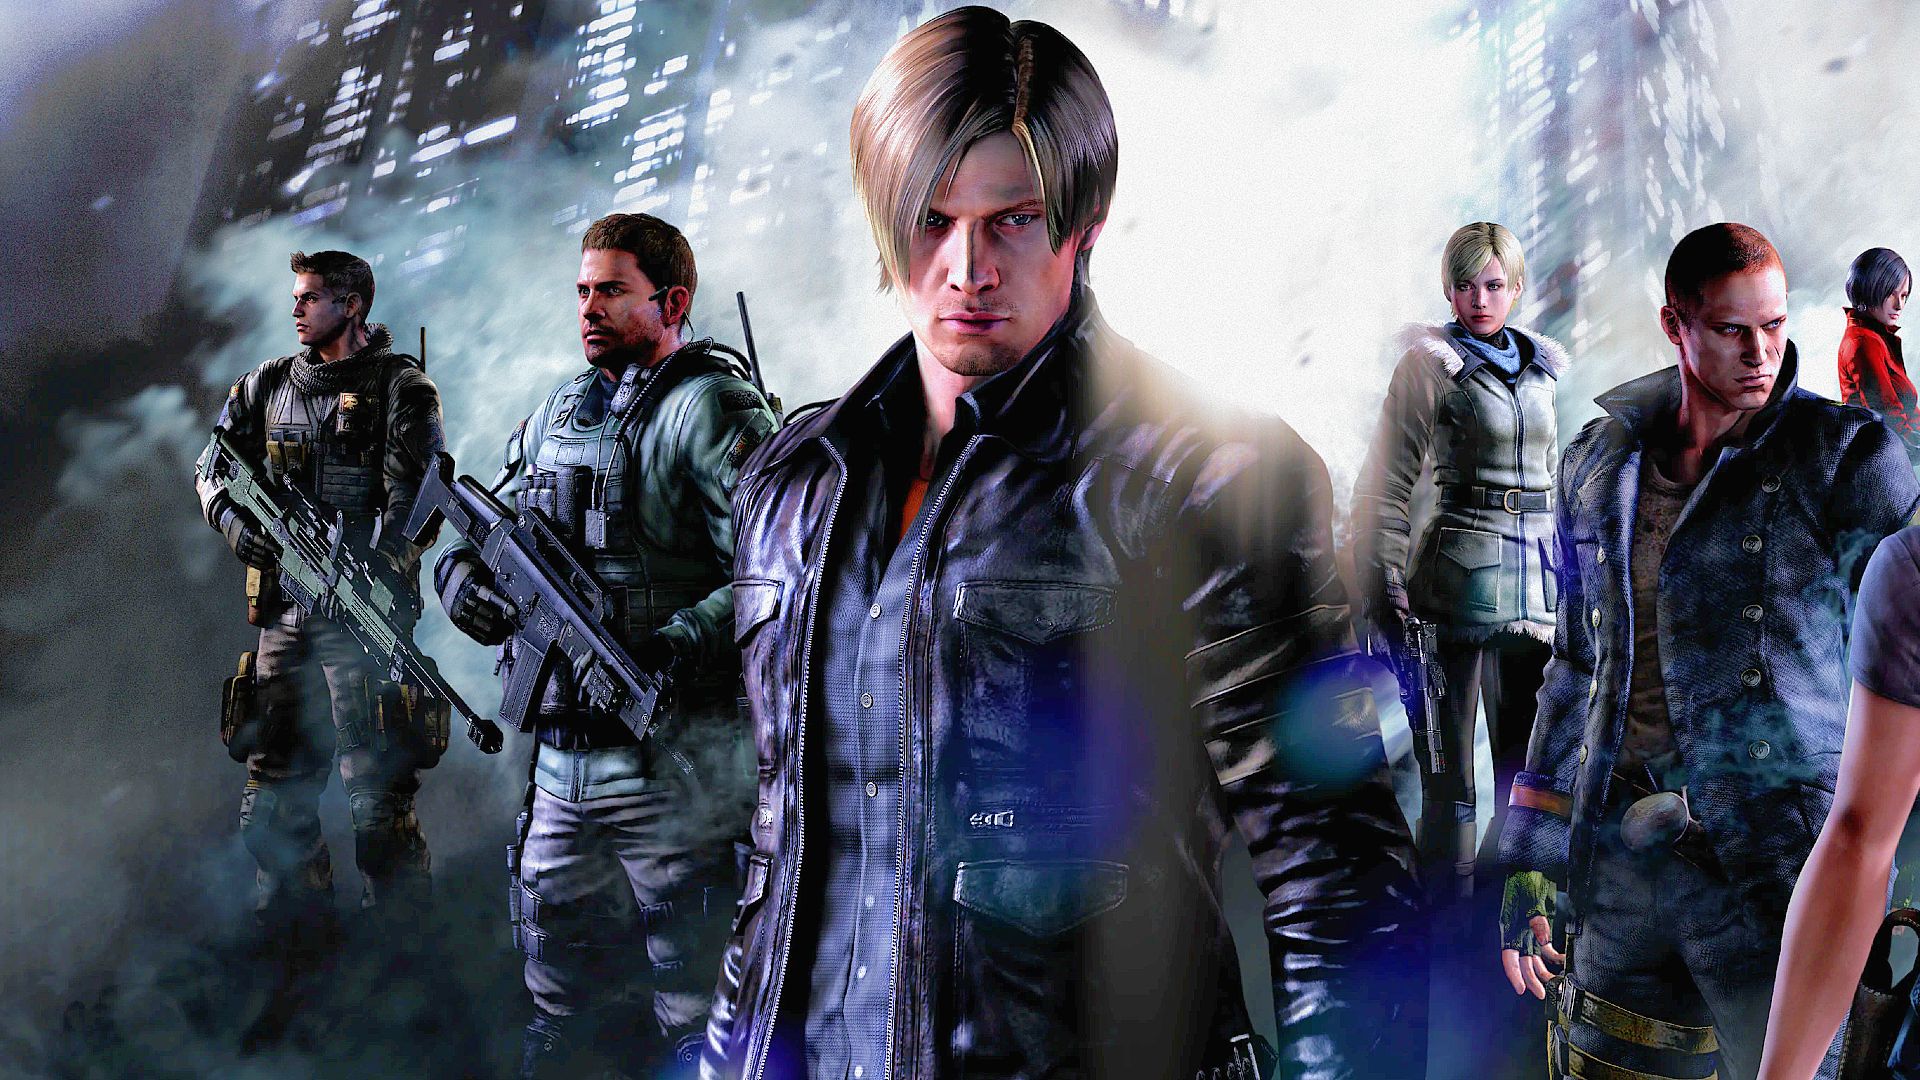 Latest Humble Bundle includes most of the Resident Evil back catalog